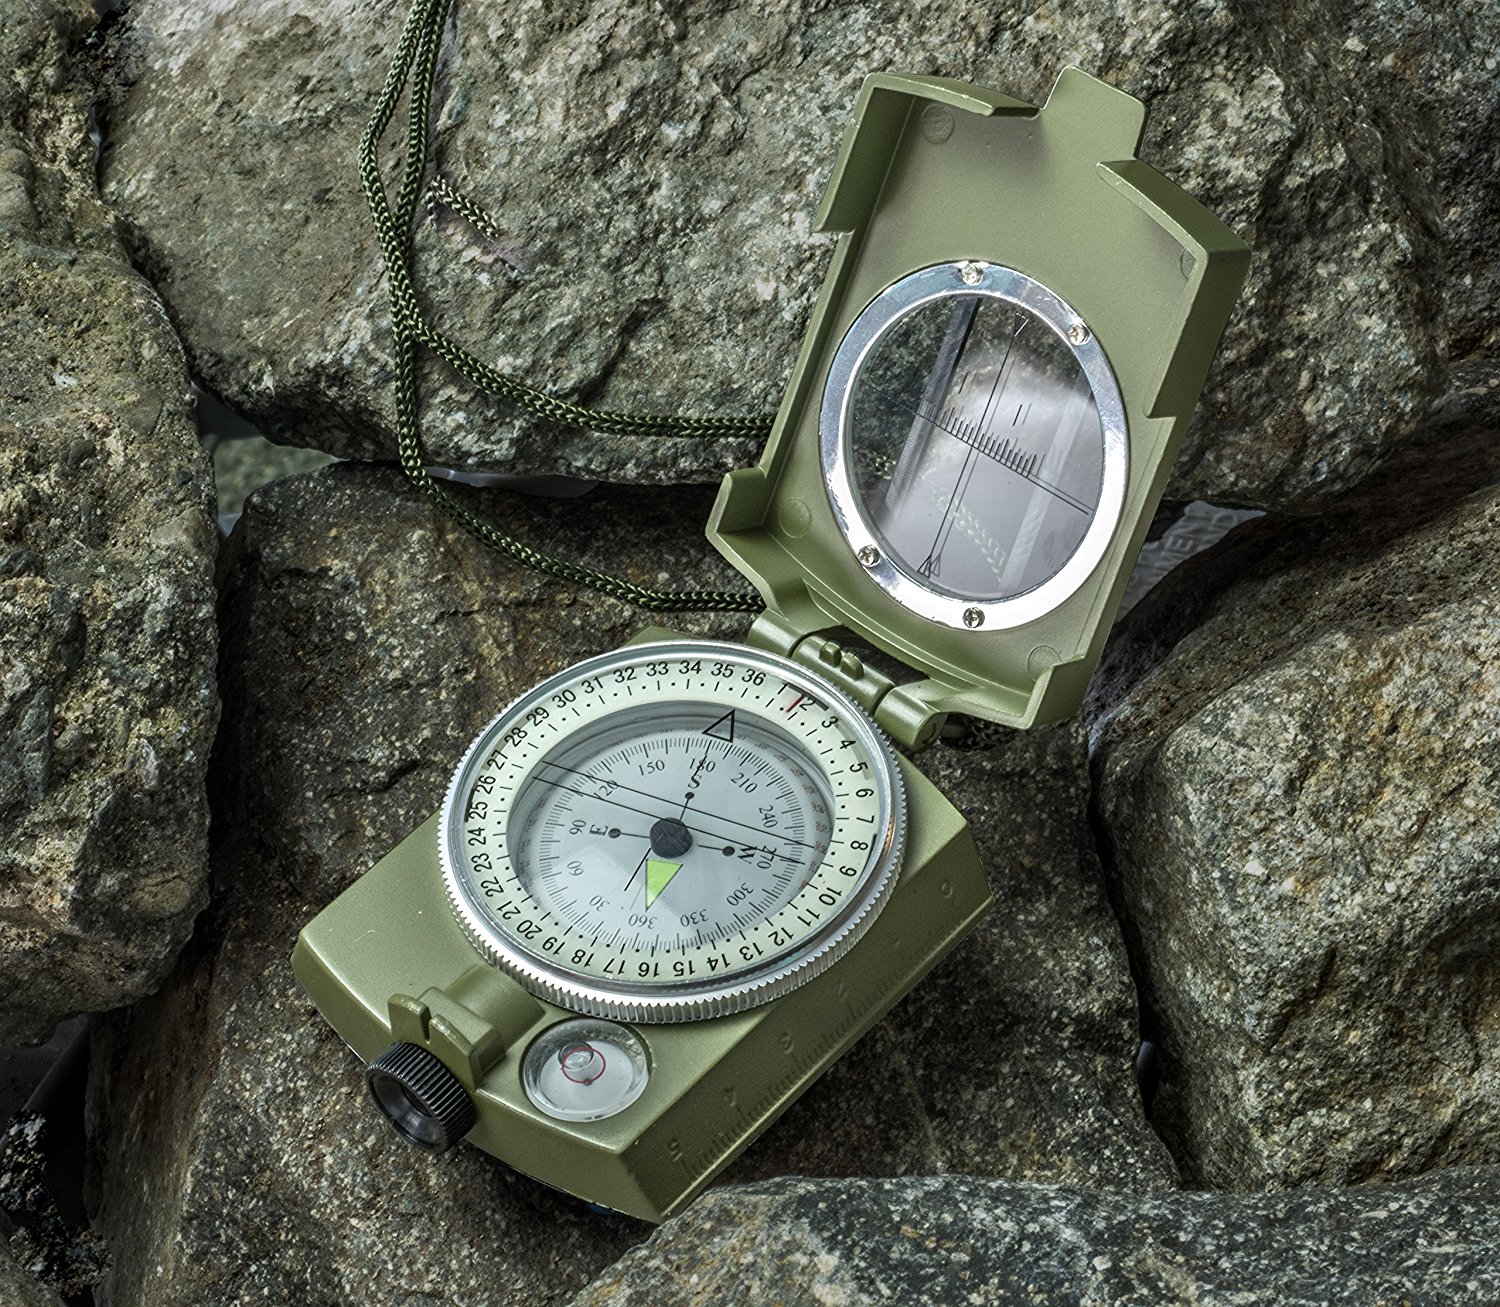 SE CC4580 MilitaryLensatic/Prismatic Sighting Compass with Pouch